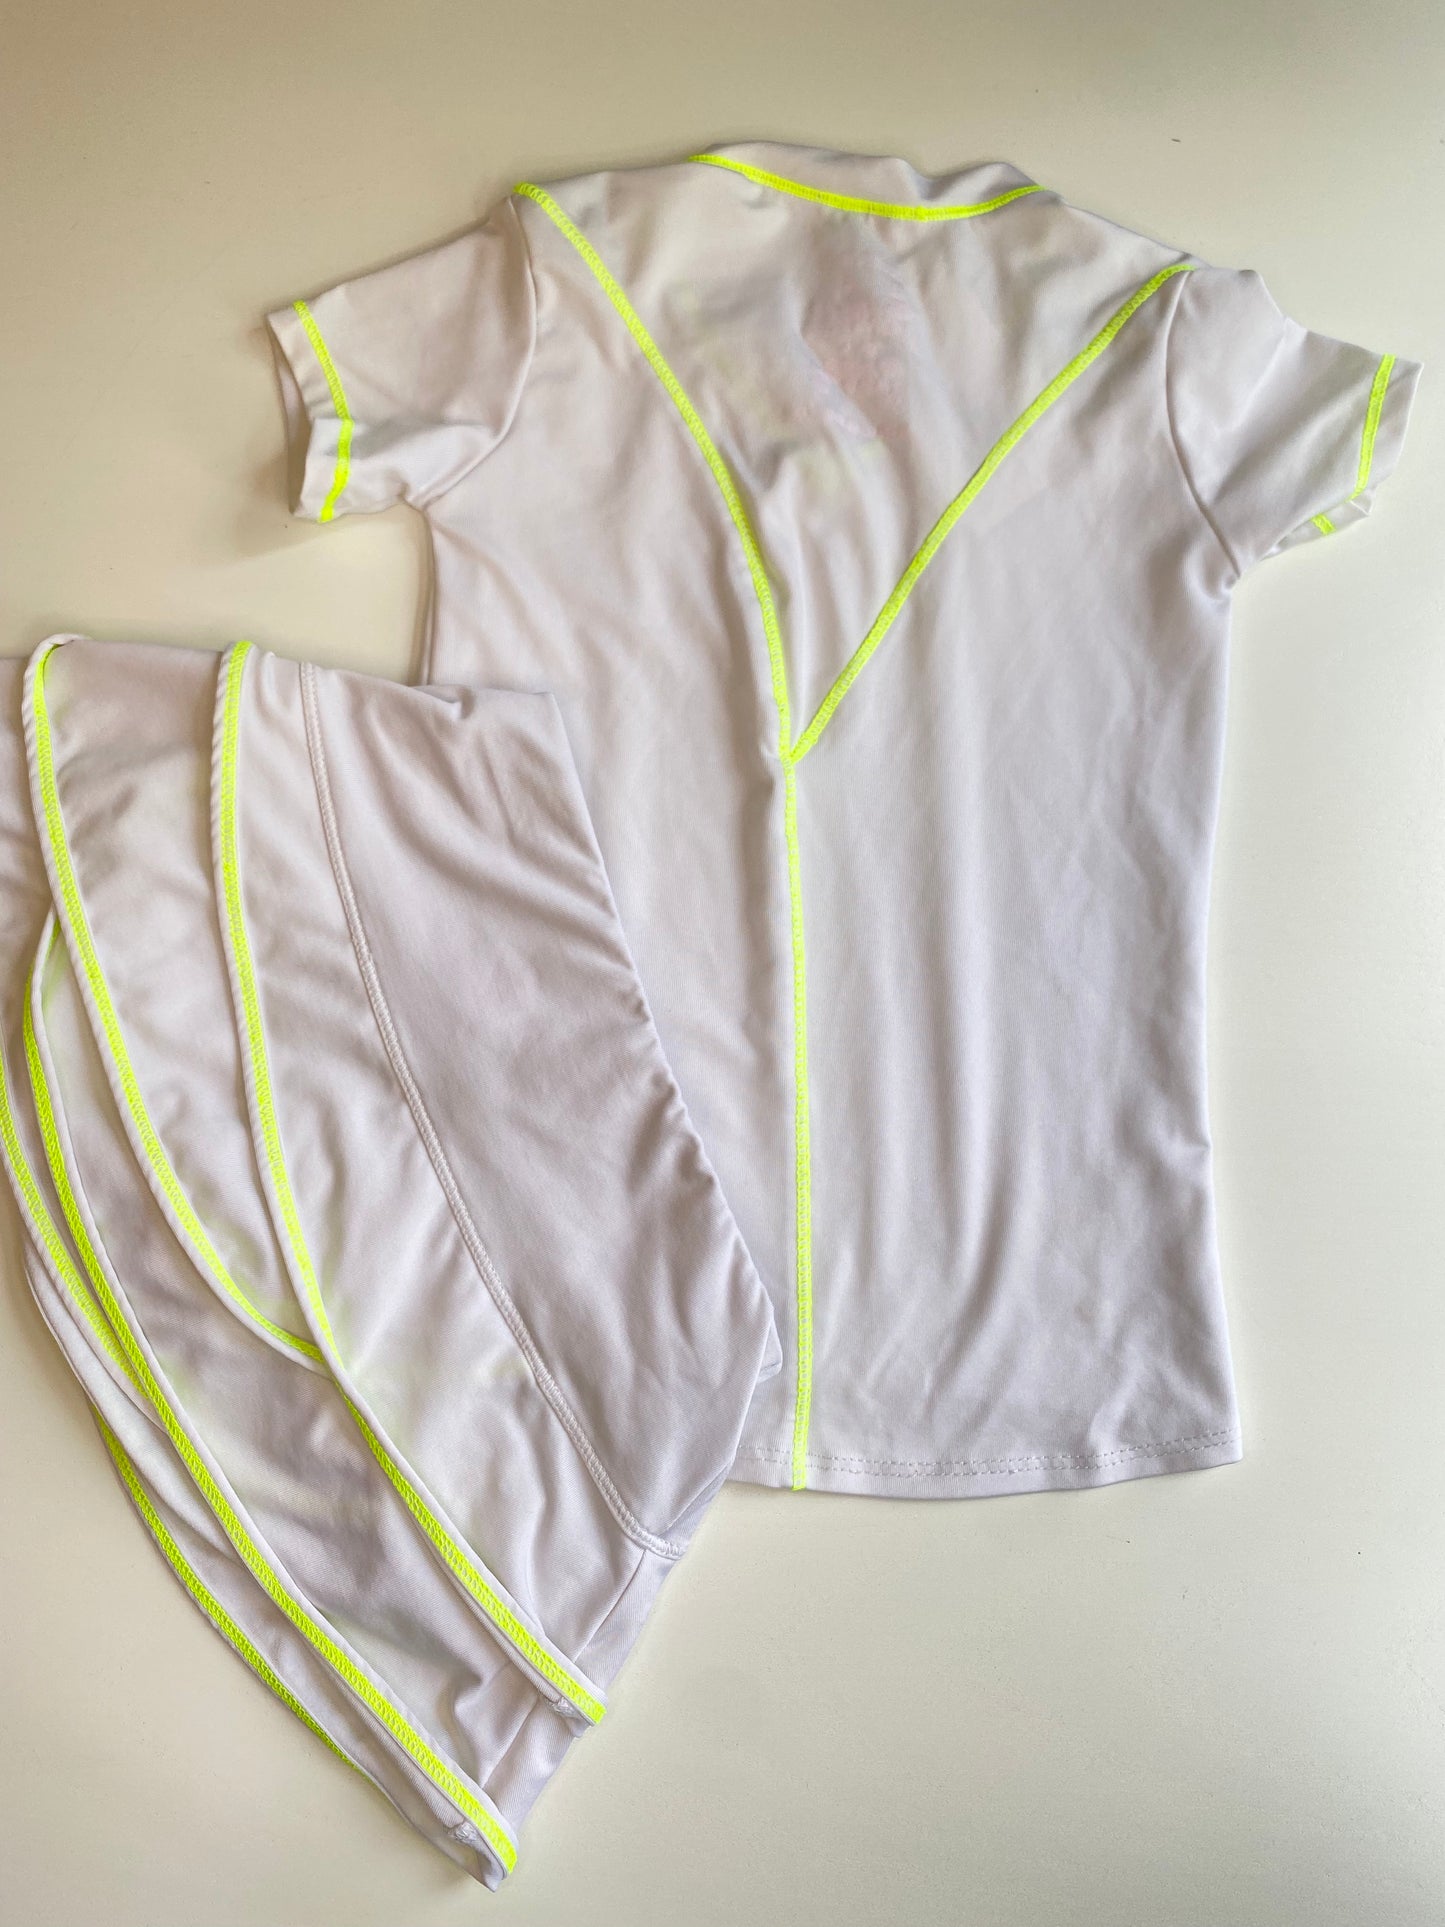 LUCKY IN LOVE 2 pieces Tennis Outfit Size 4-5y